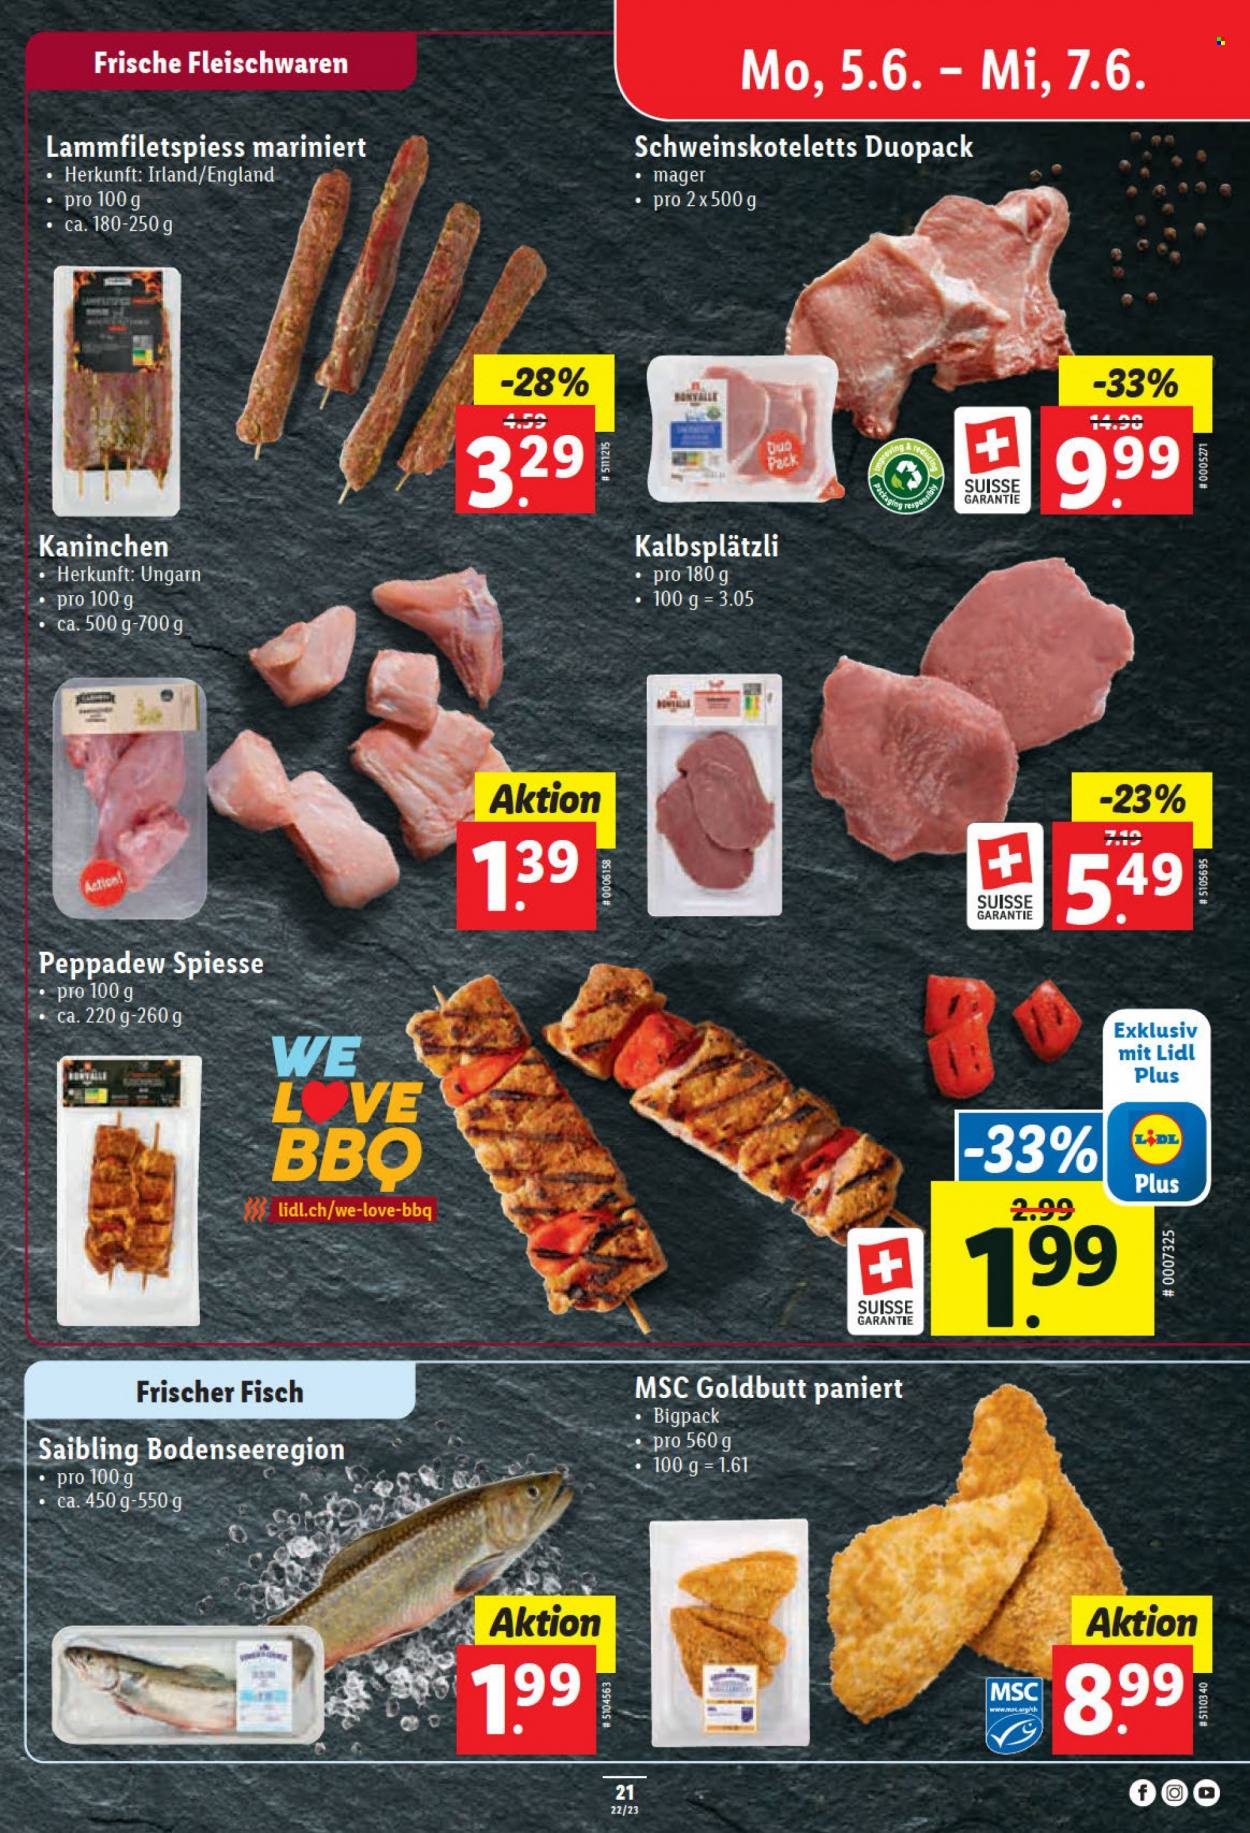 Catalogue Lidl - 1.6.2023 - 7.6.2023. Page 21.